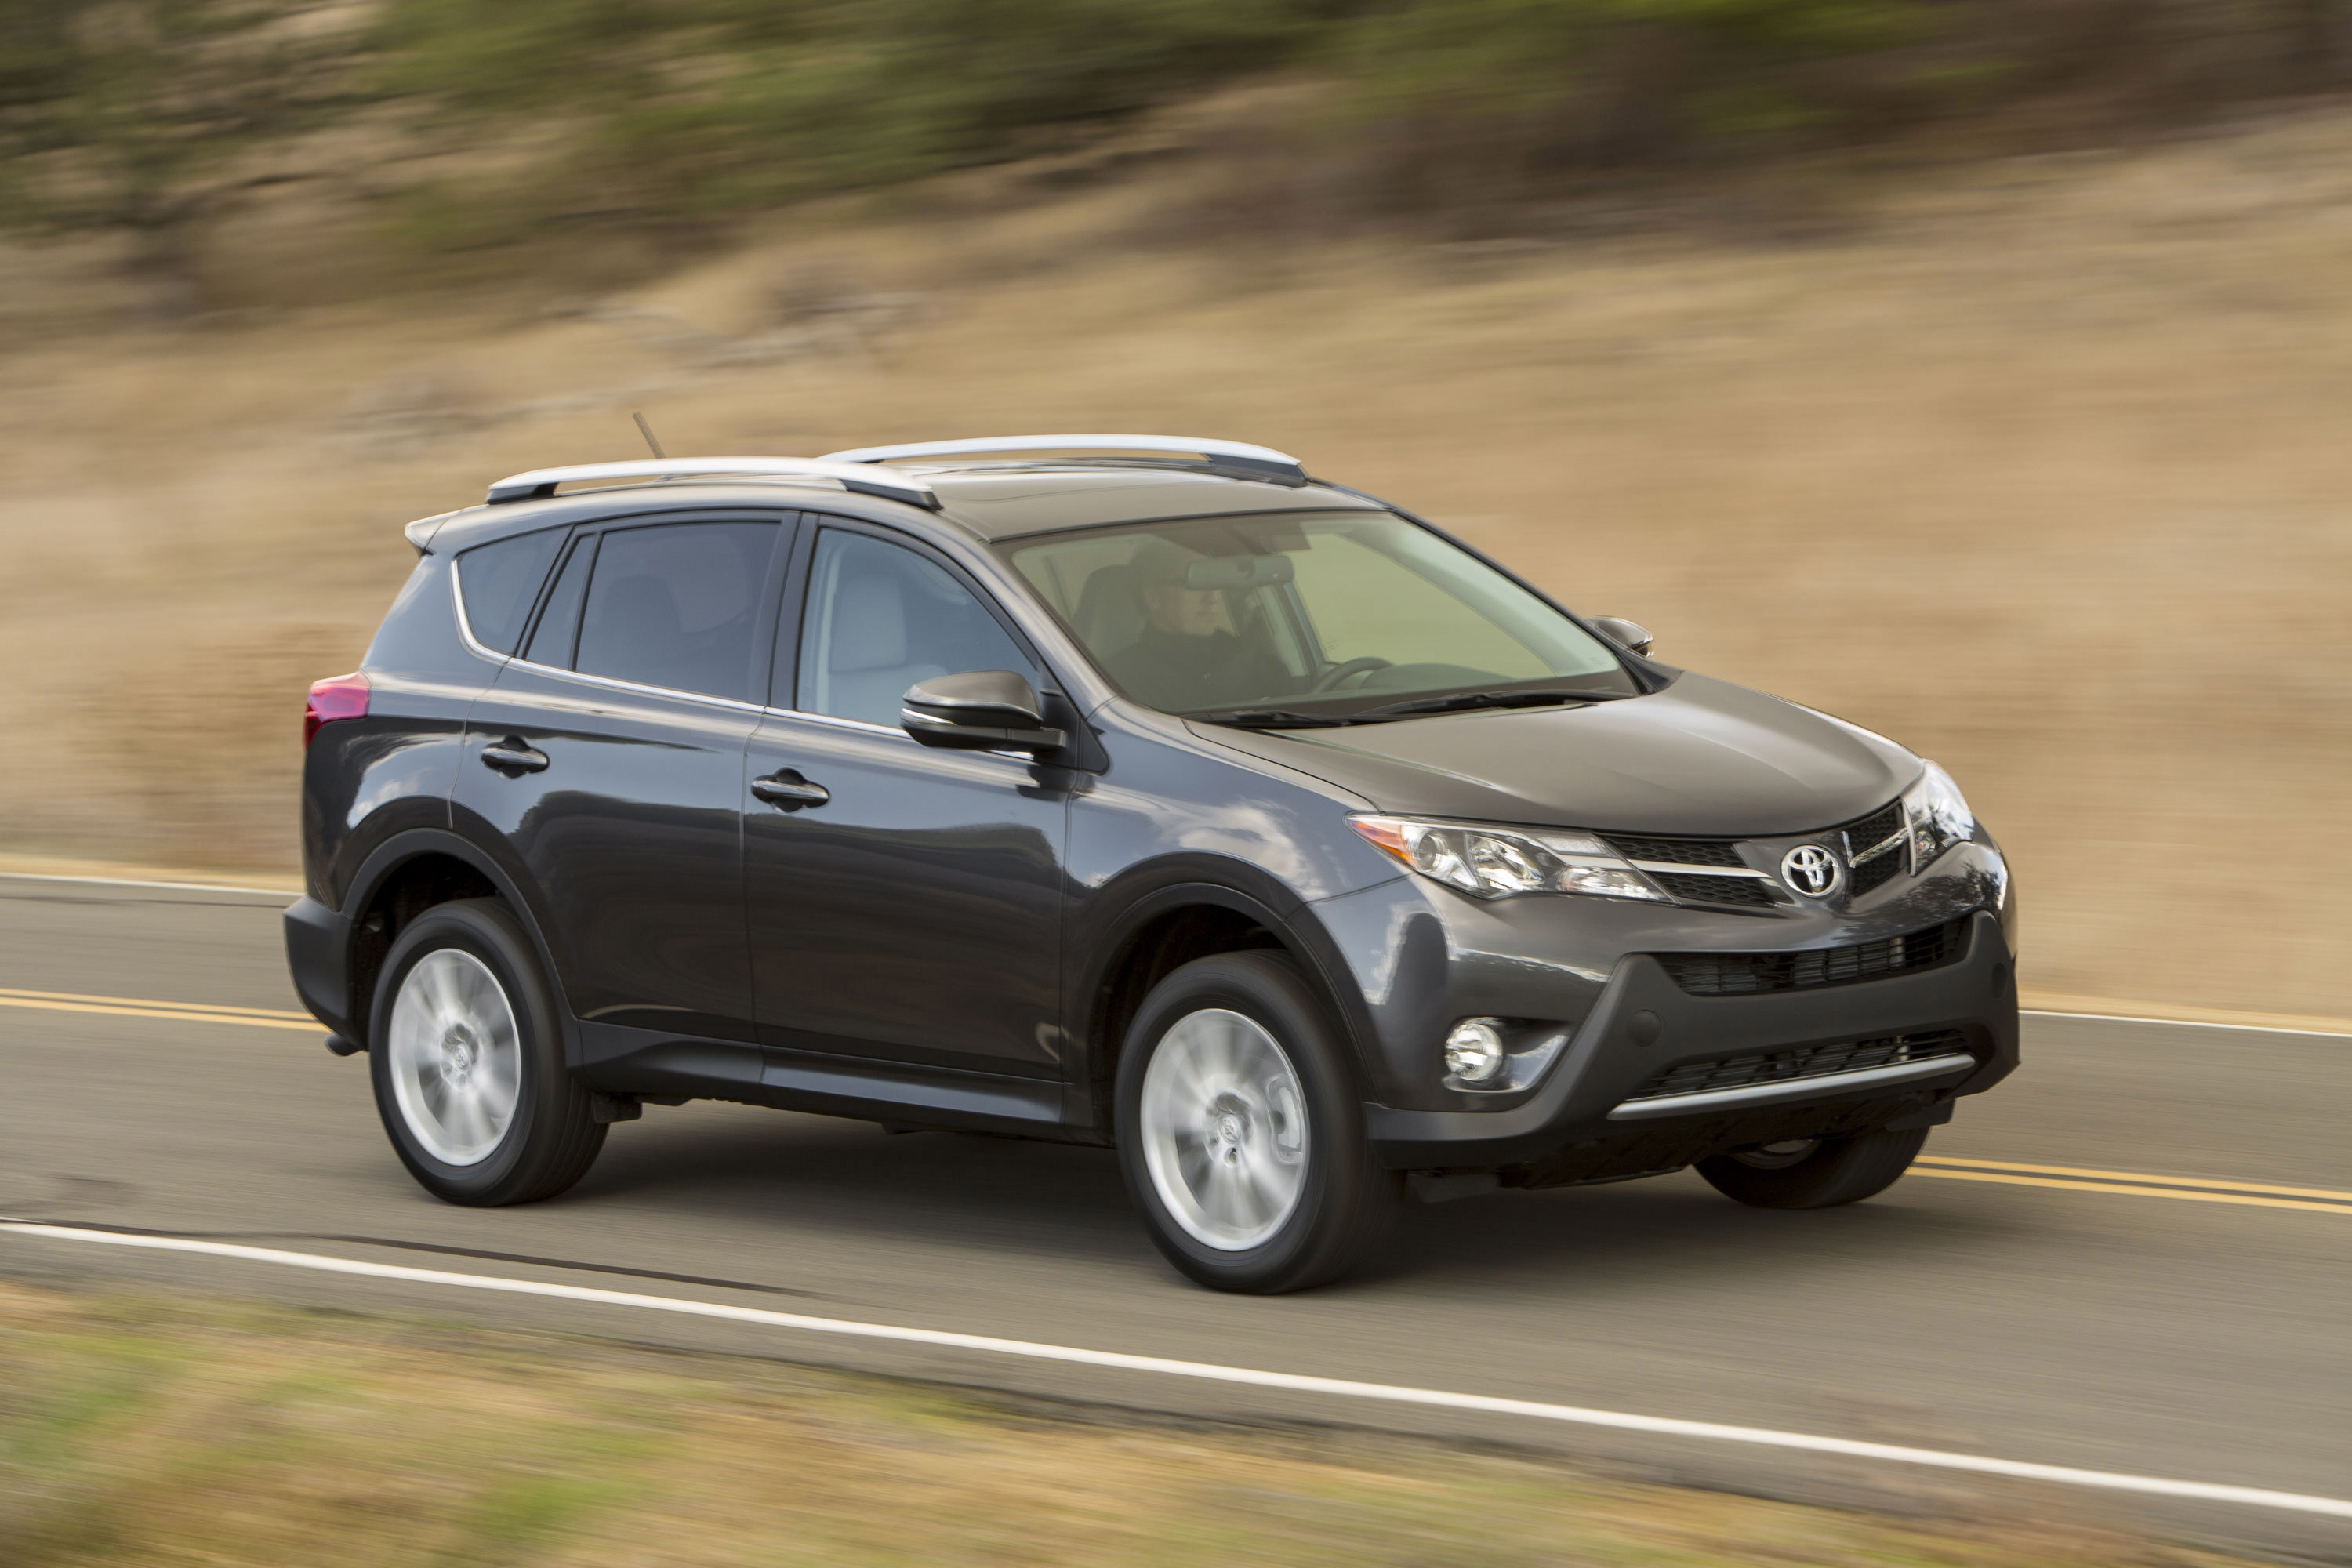 2013 Toyota Rav4 Available With Toyota Genuine Accessories